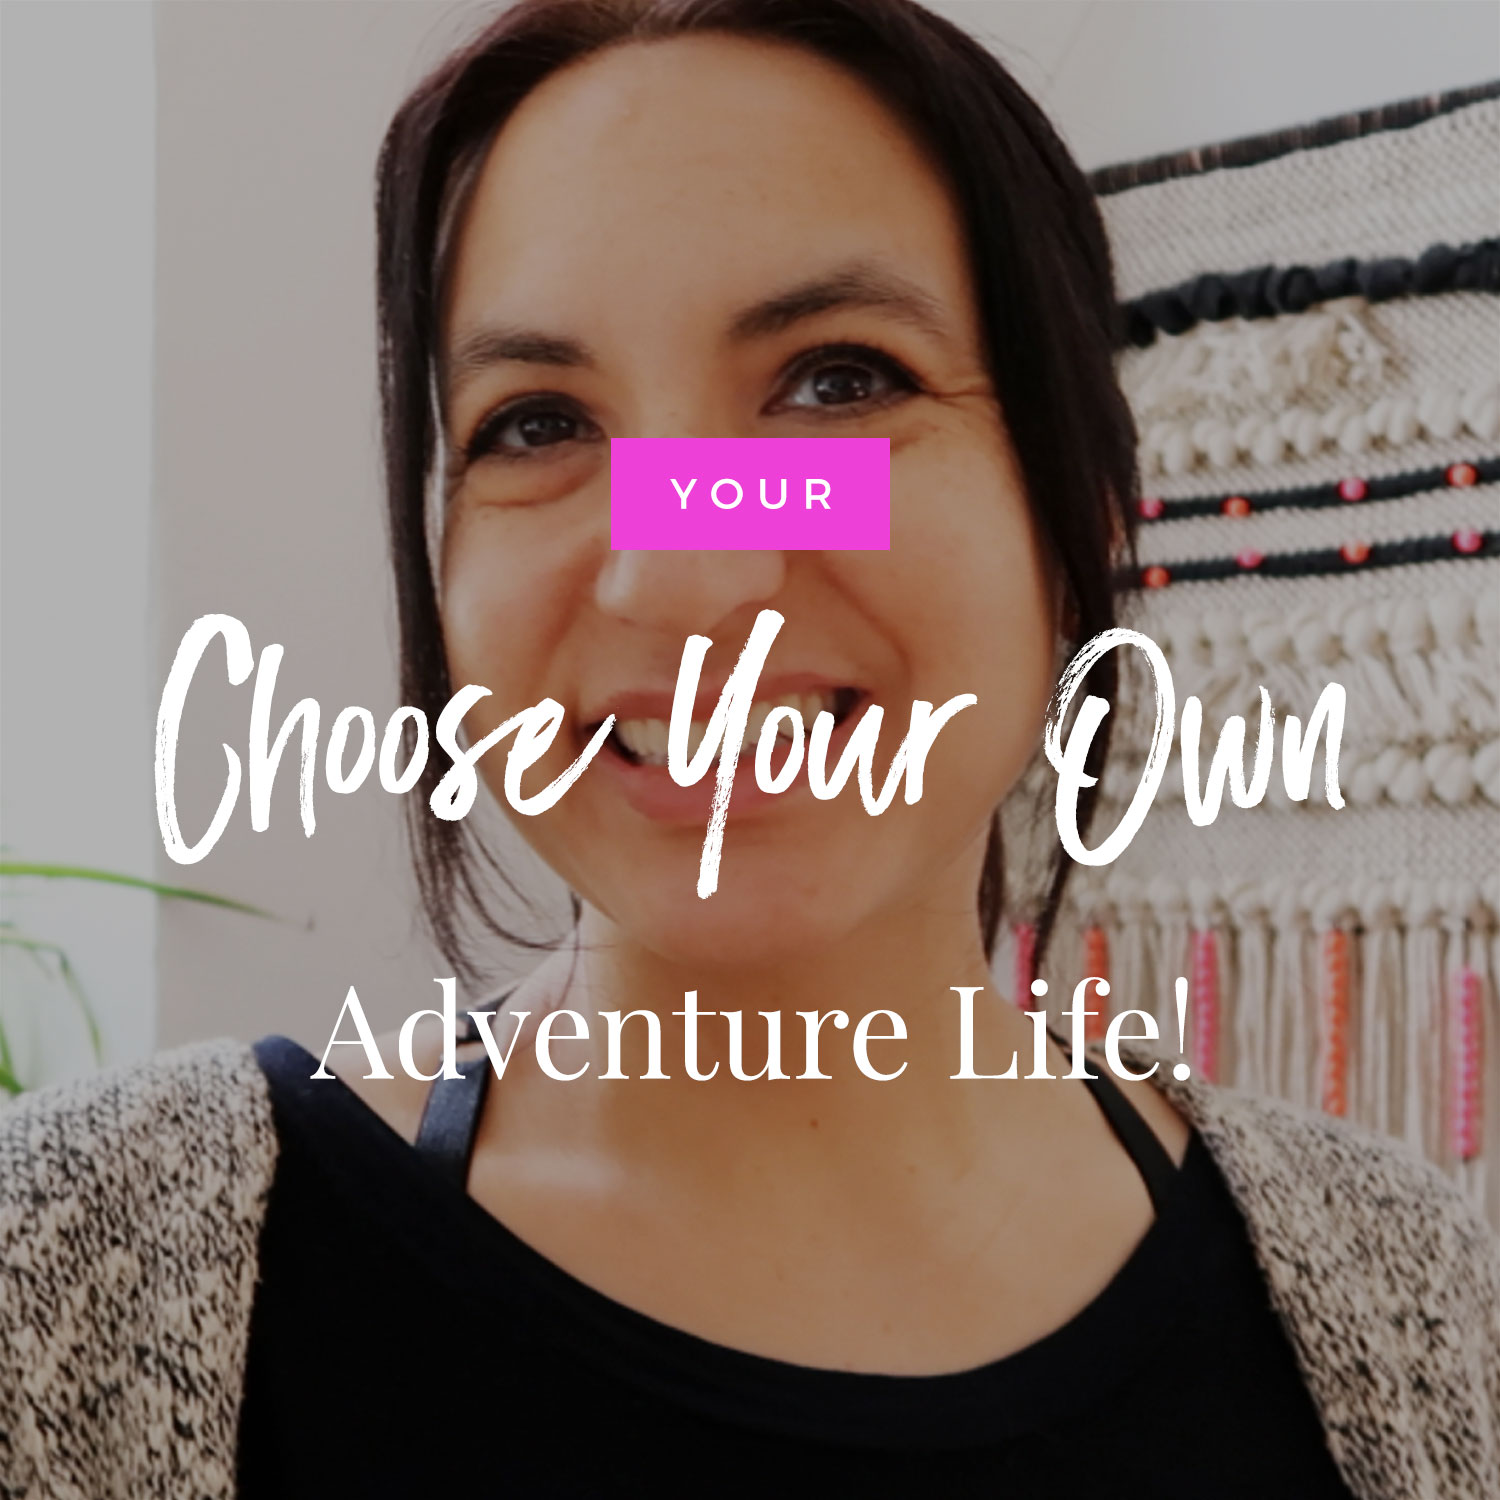 Your Choose Your Own Adventure Life!